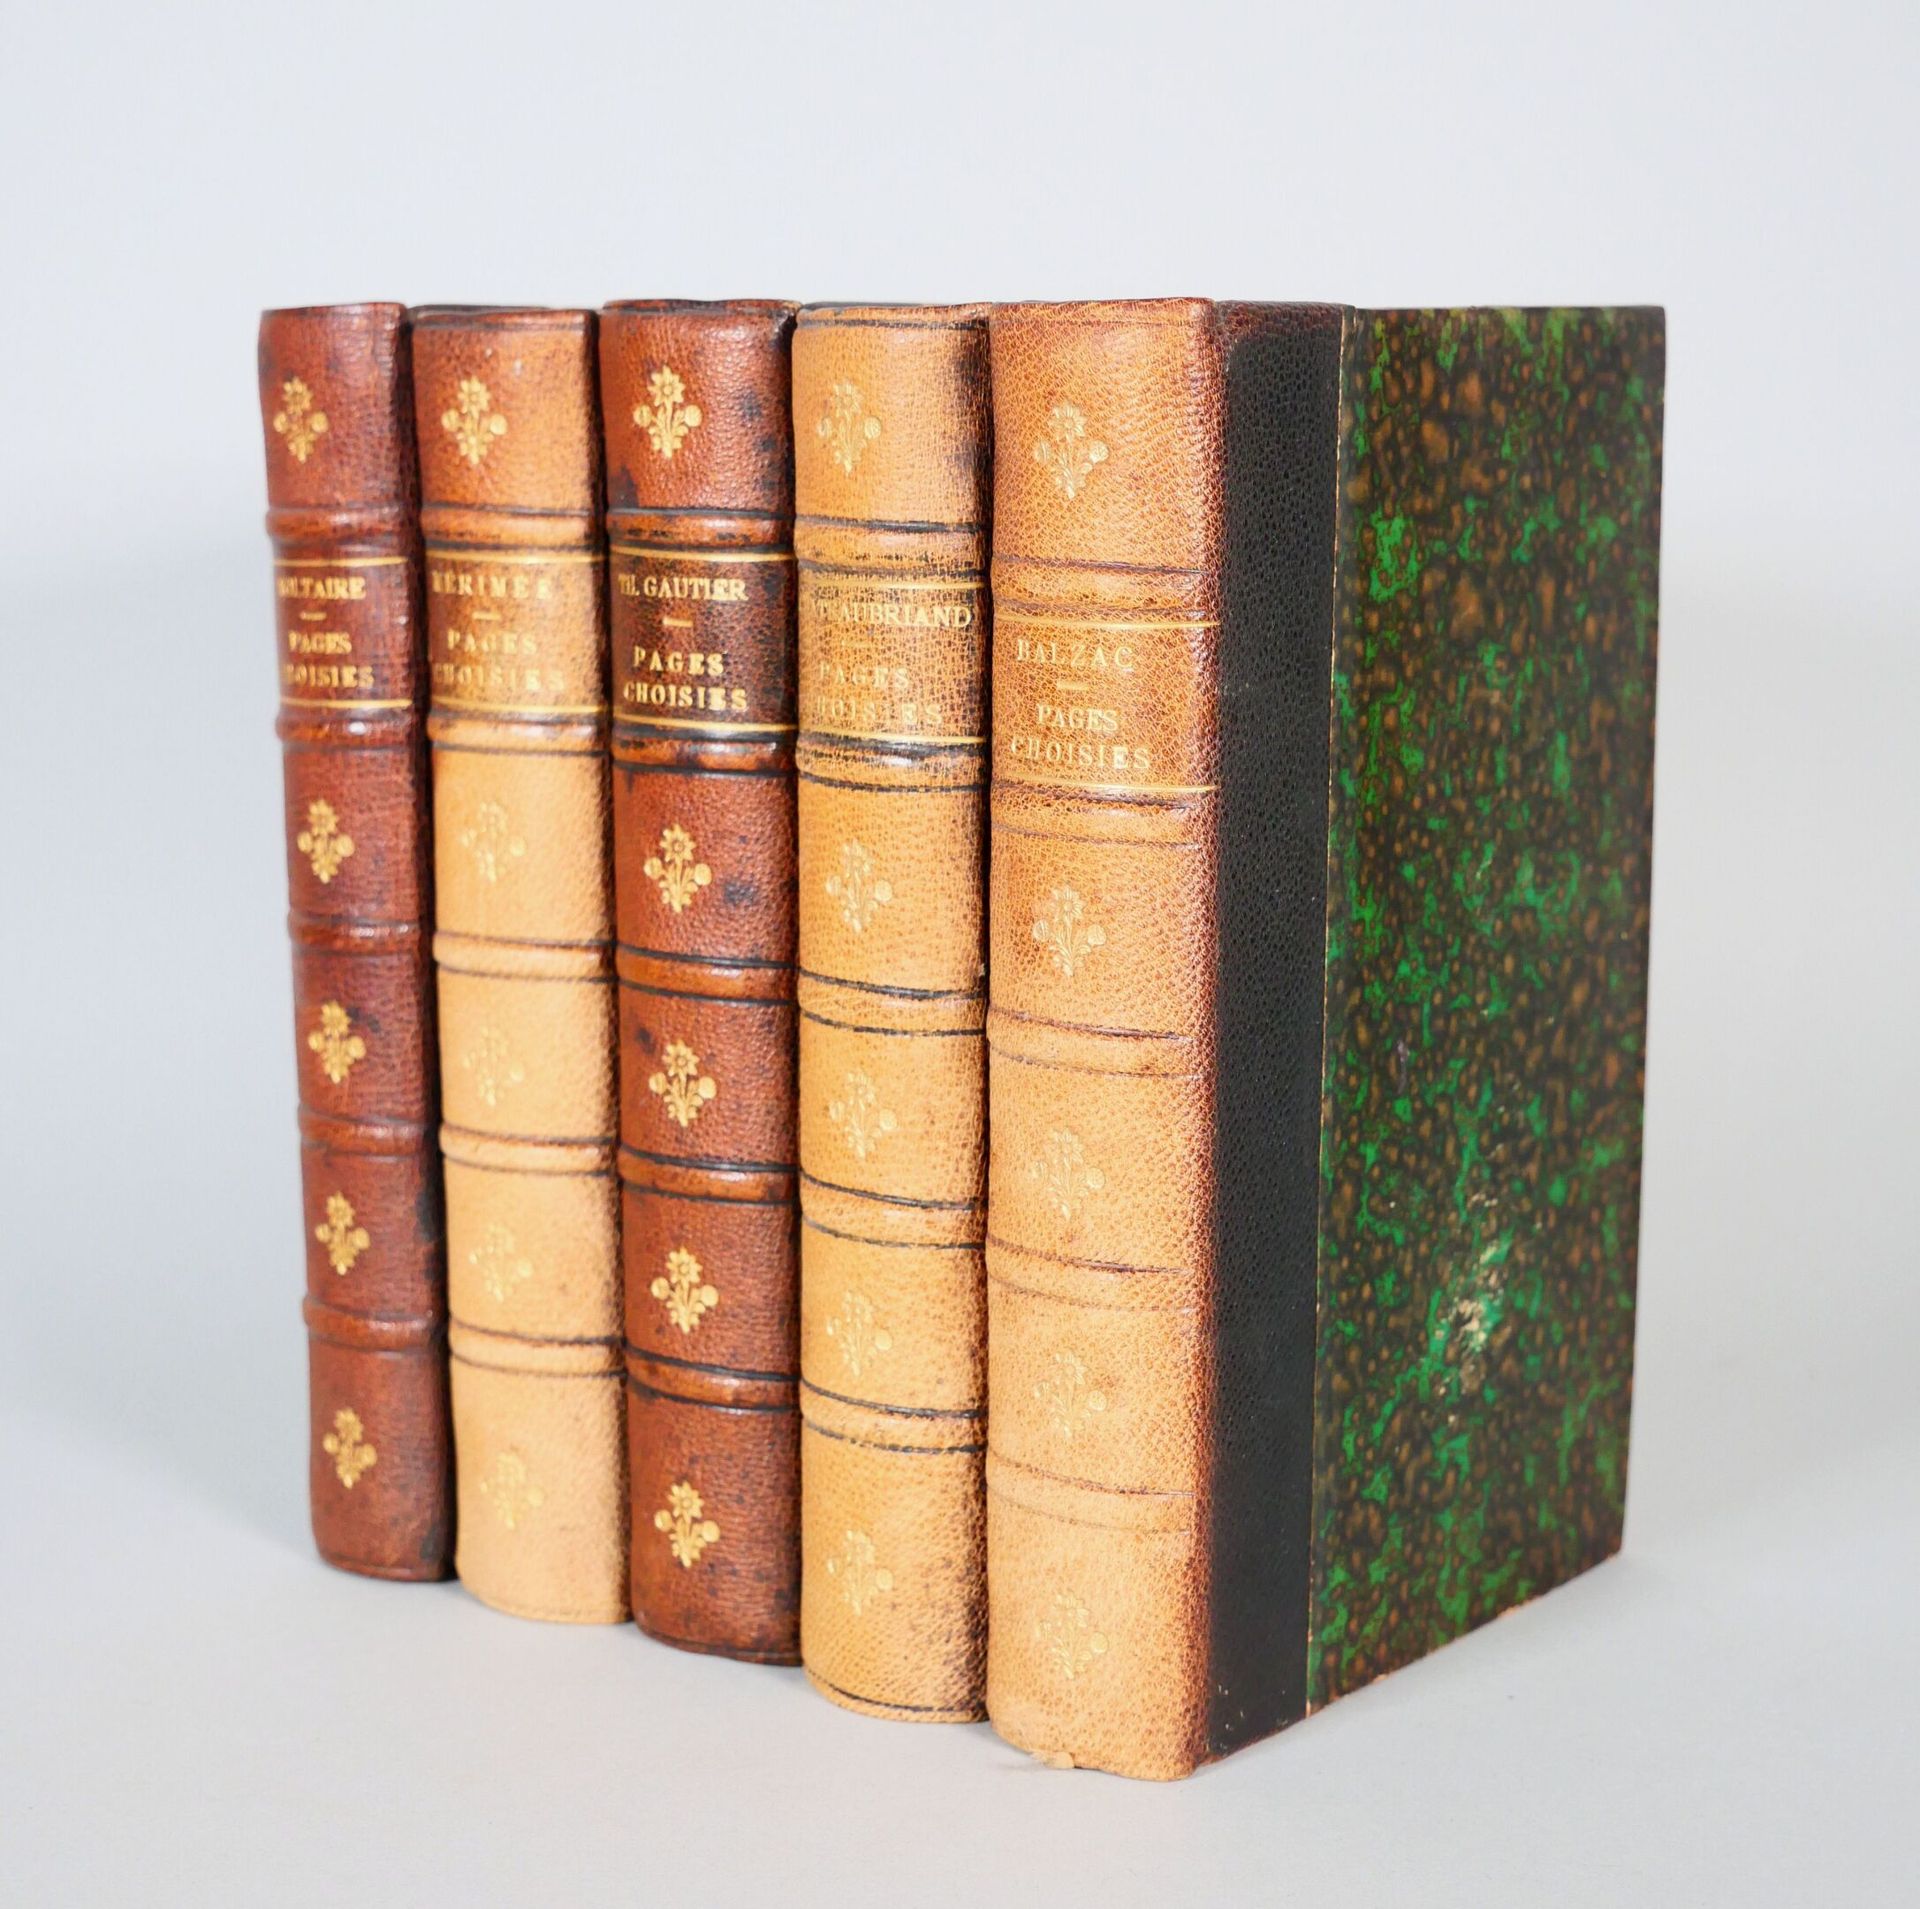 Null [LITERATURE]. Set of 5 Volumes.
Literary Reading - Selected Pages by Great &hellip;